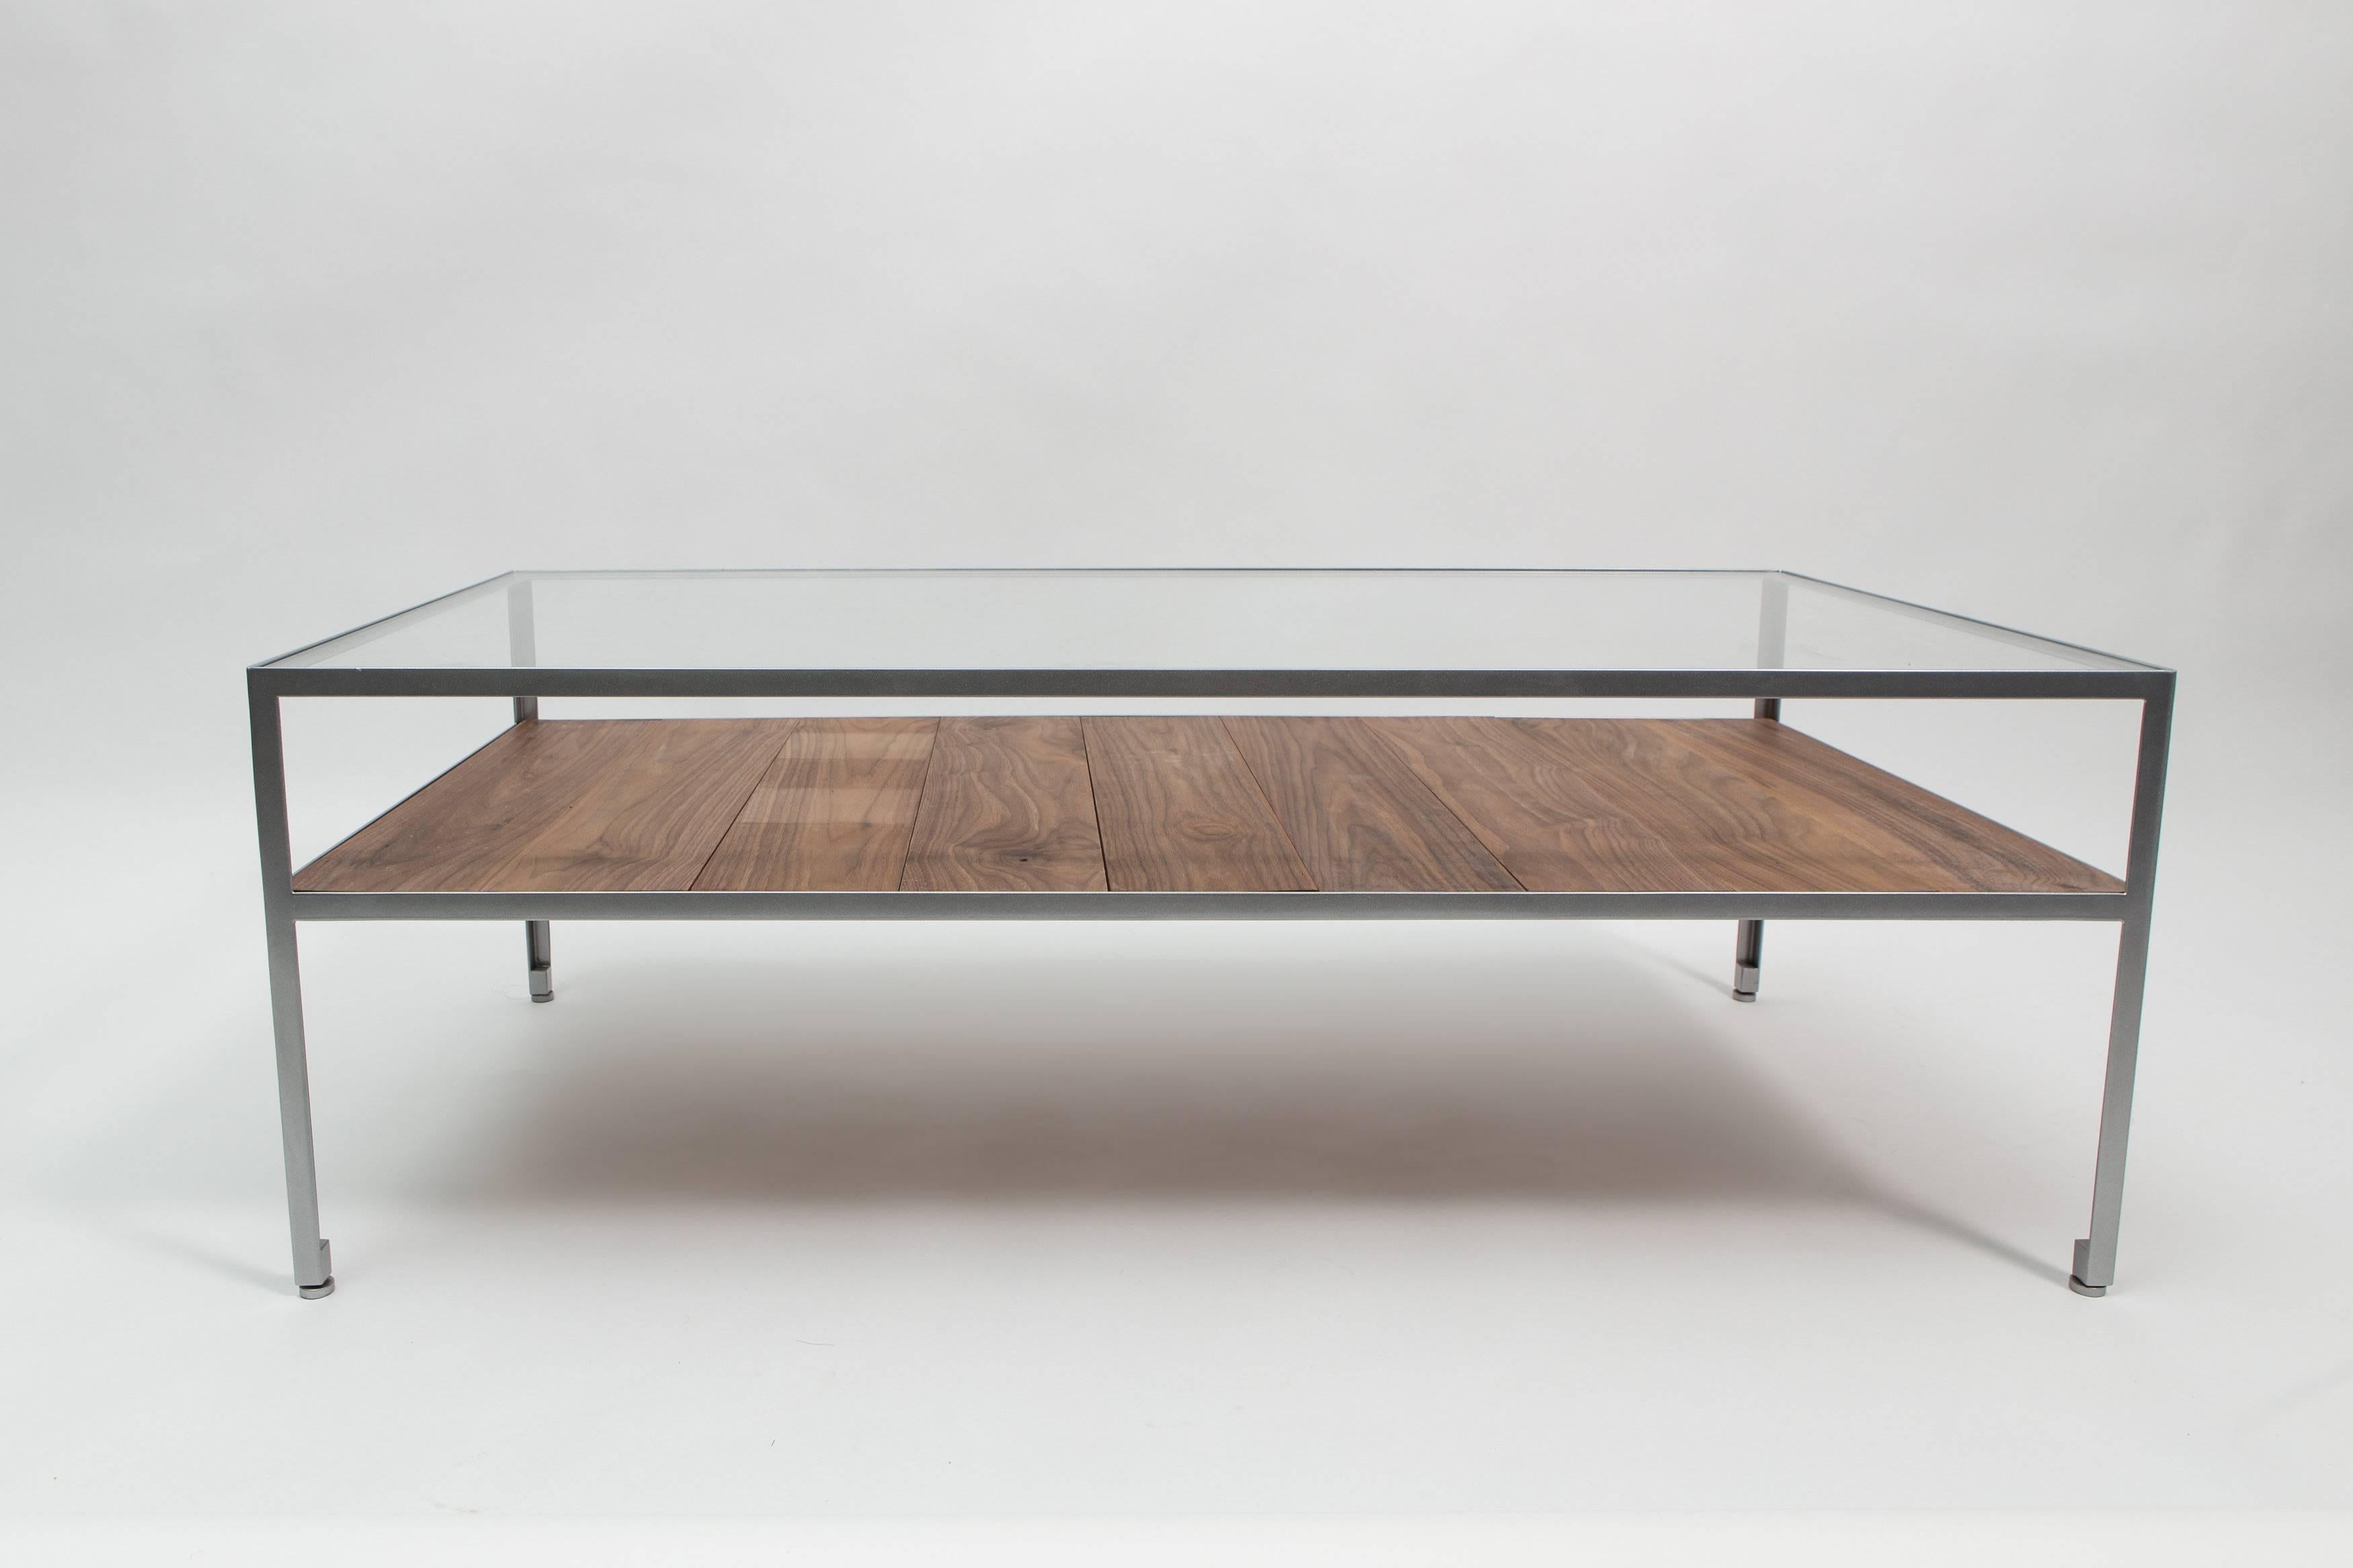 Angle steel coffee table with nickel frame, glass top and walnut slats.